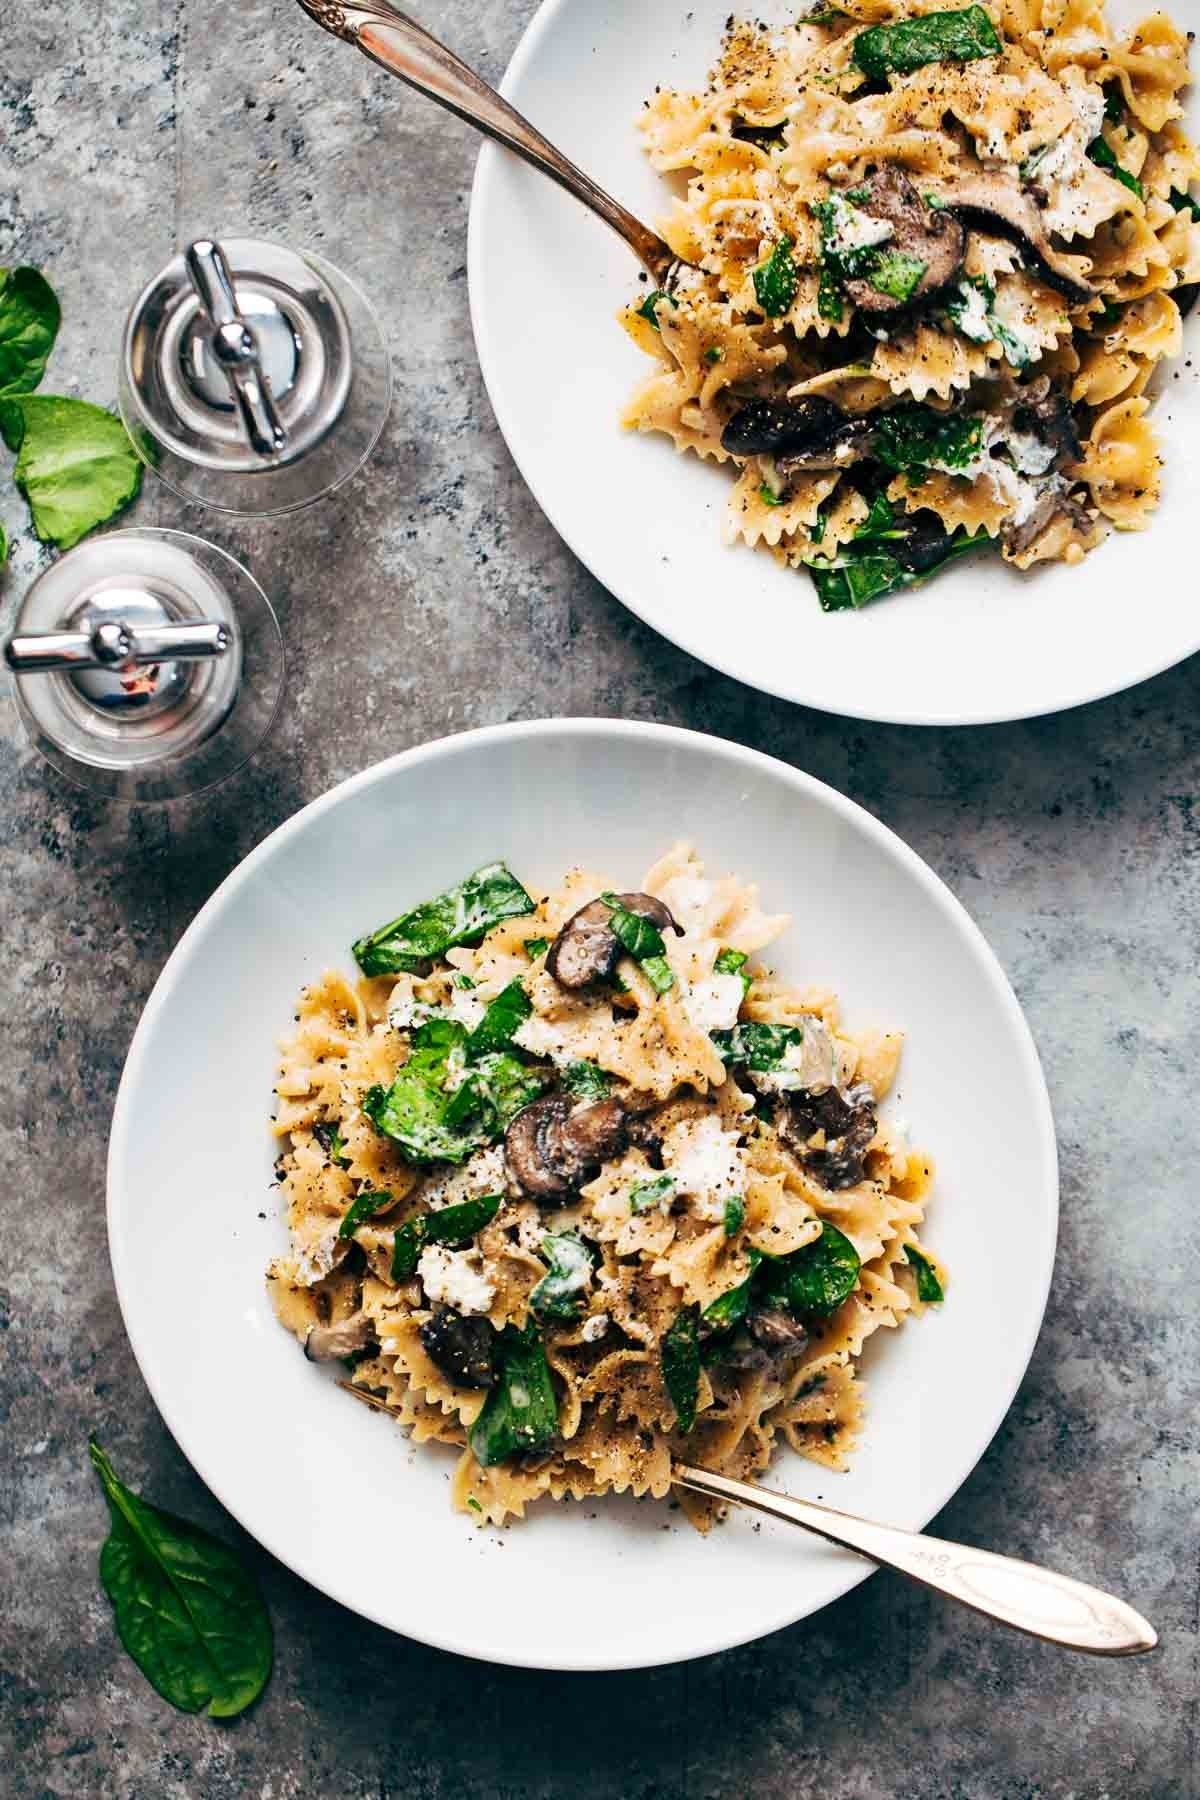 10 Beautiful Healthy Dinner Ideas For Two date night mushroom pasta with goat cheese recipe pinch of yum 2 2022